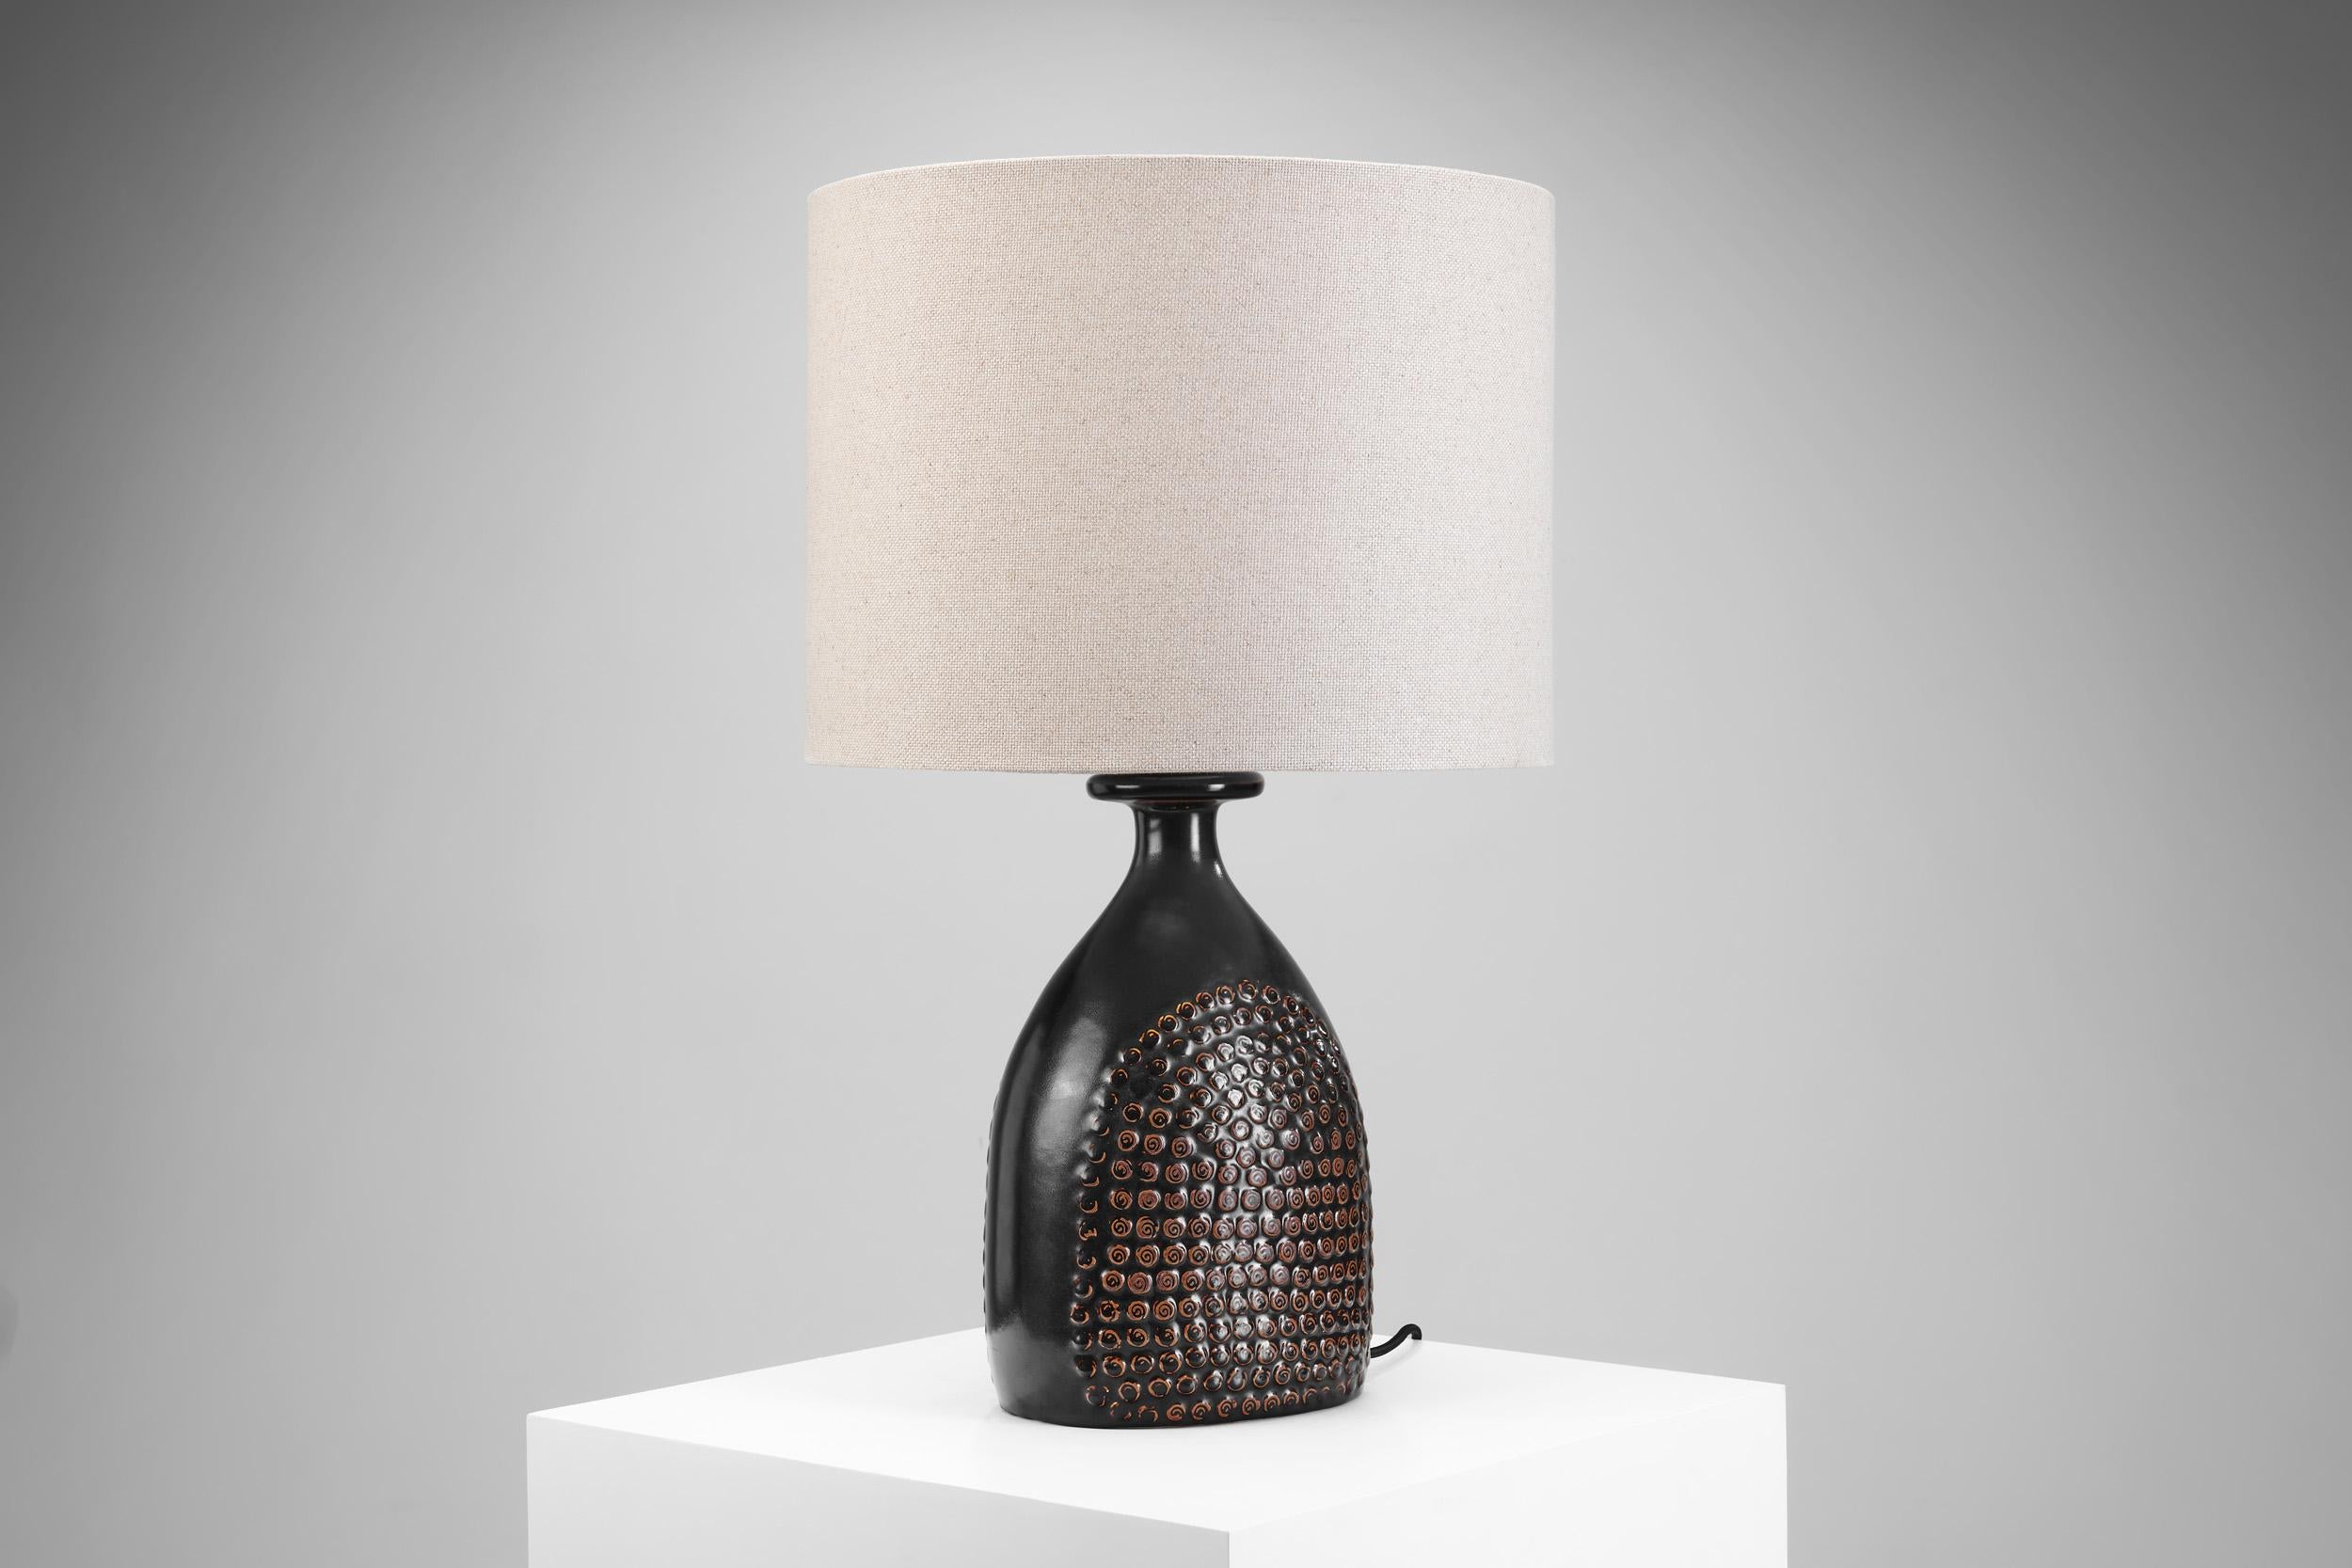 Mid-20th Century Stig Lindberg Stoneware Table Lamp with Fabric Shade, Sweden 1960s For Sale